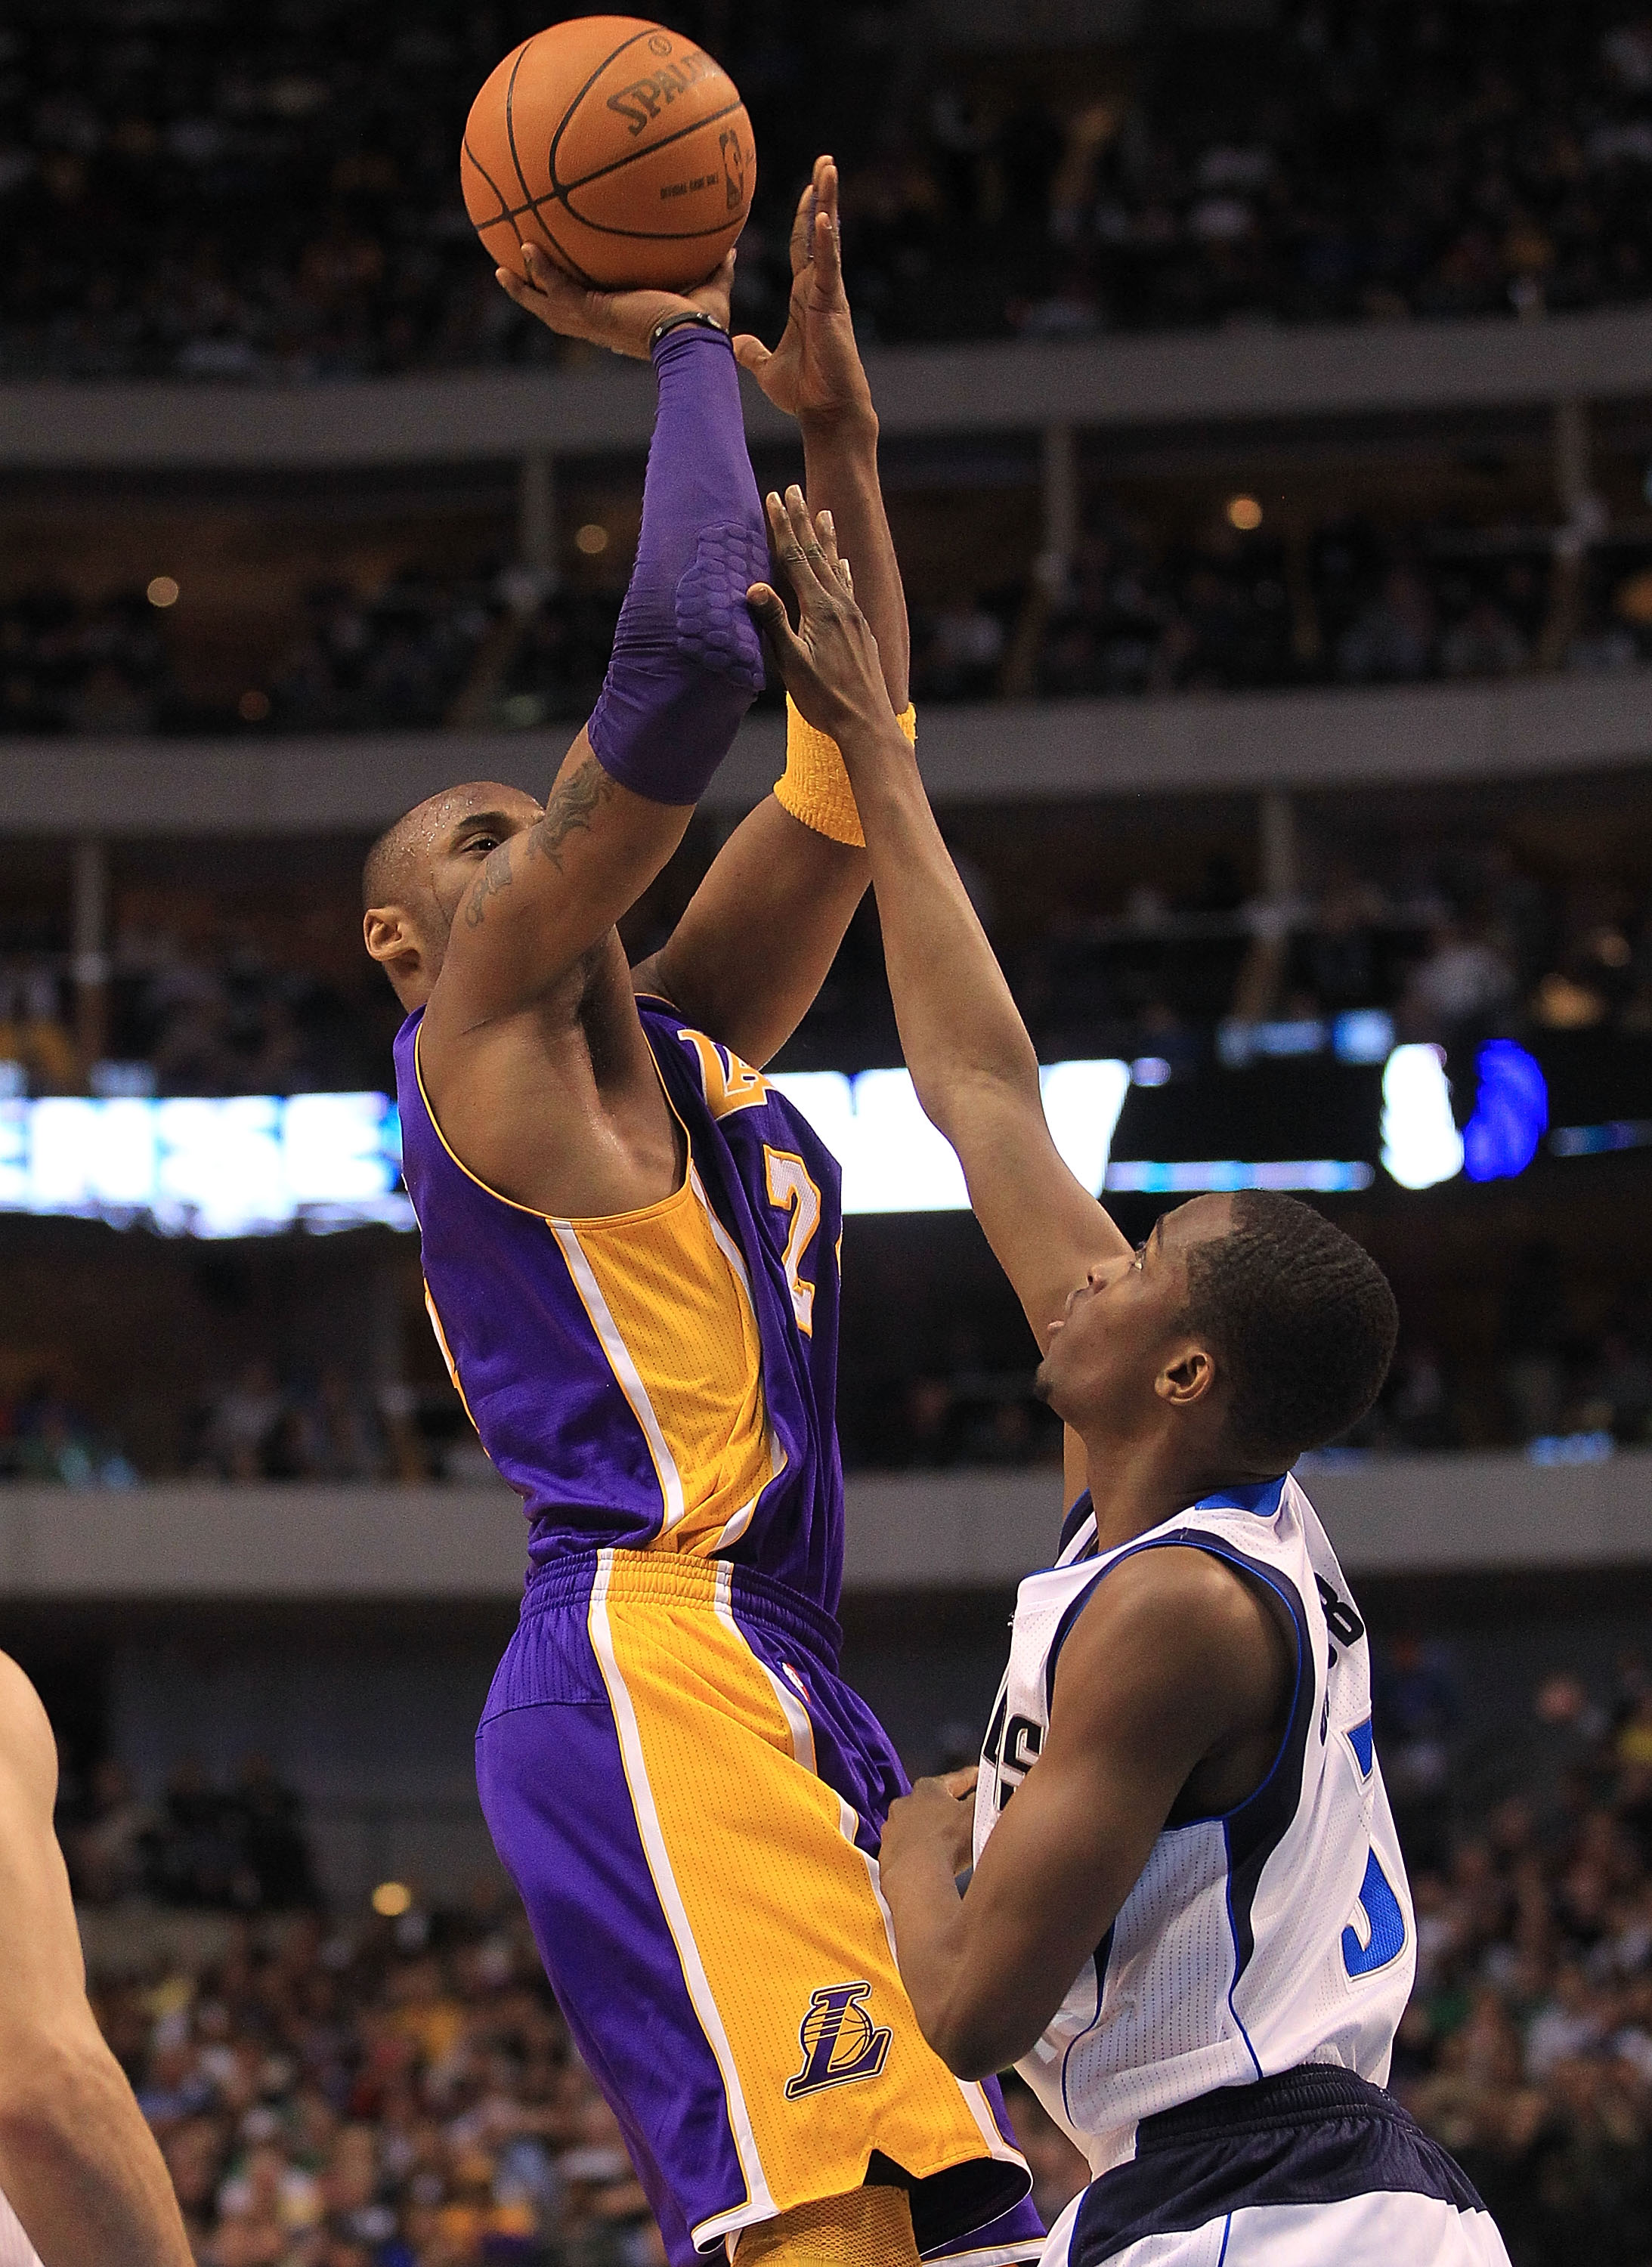 kobe bryant shooting form from behind